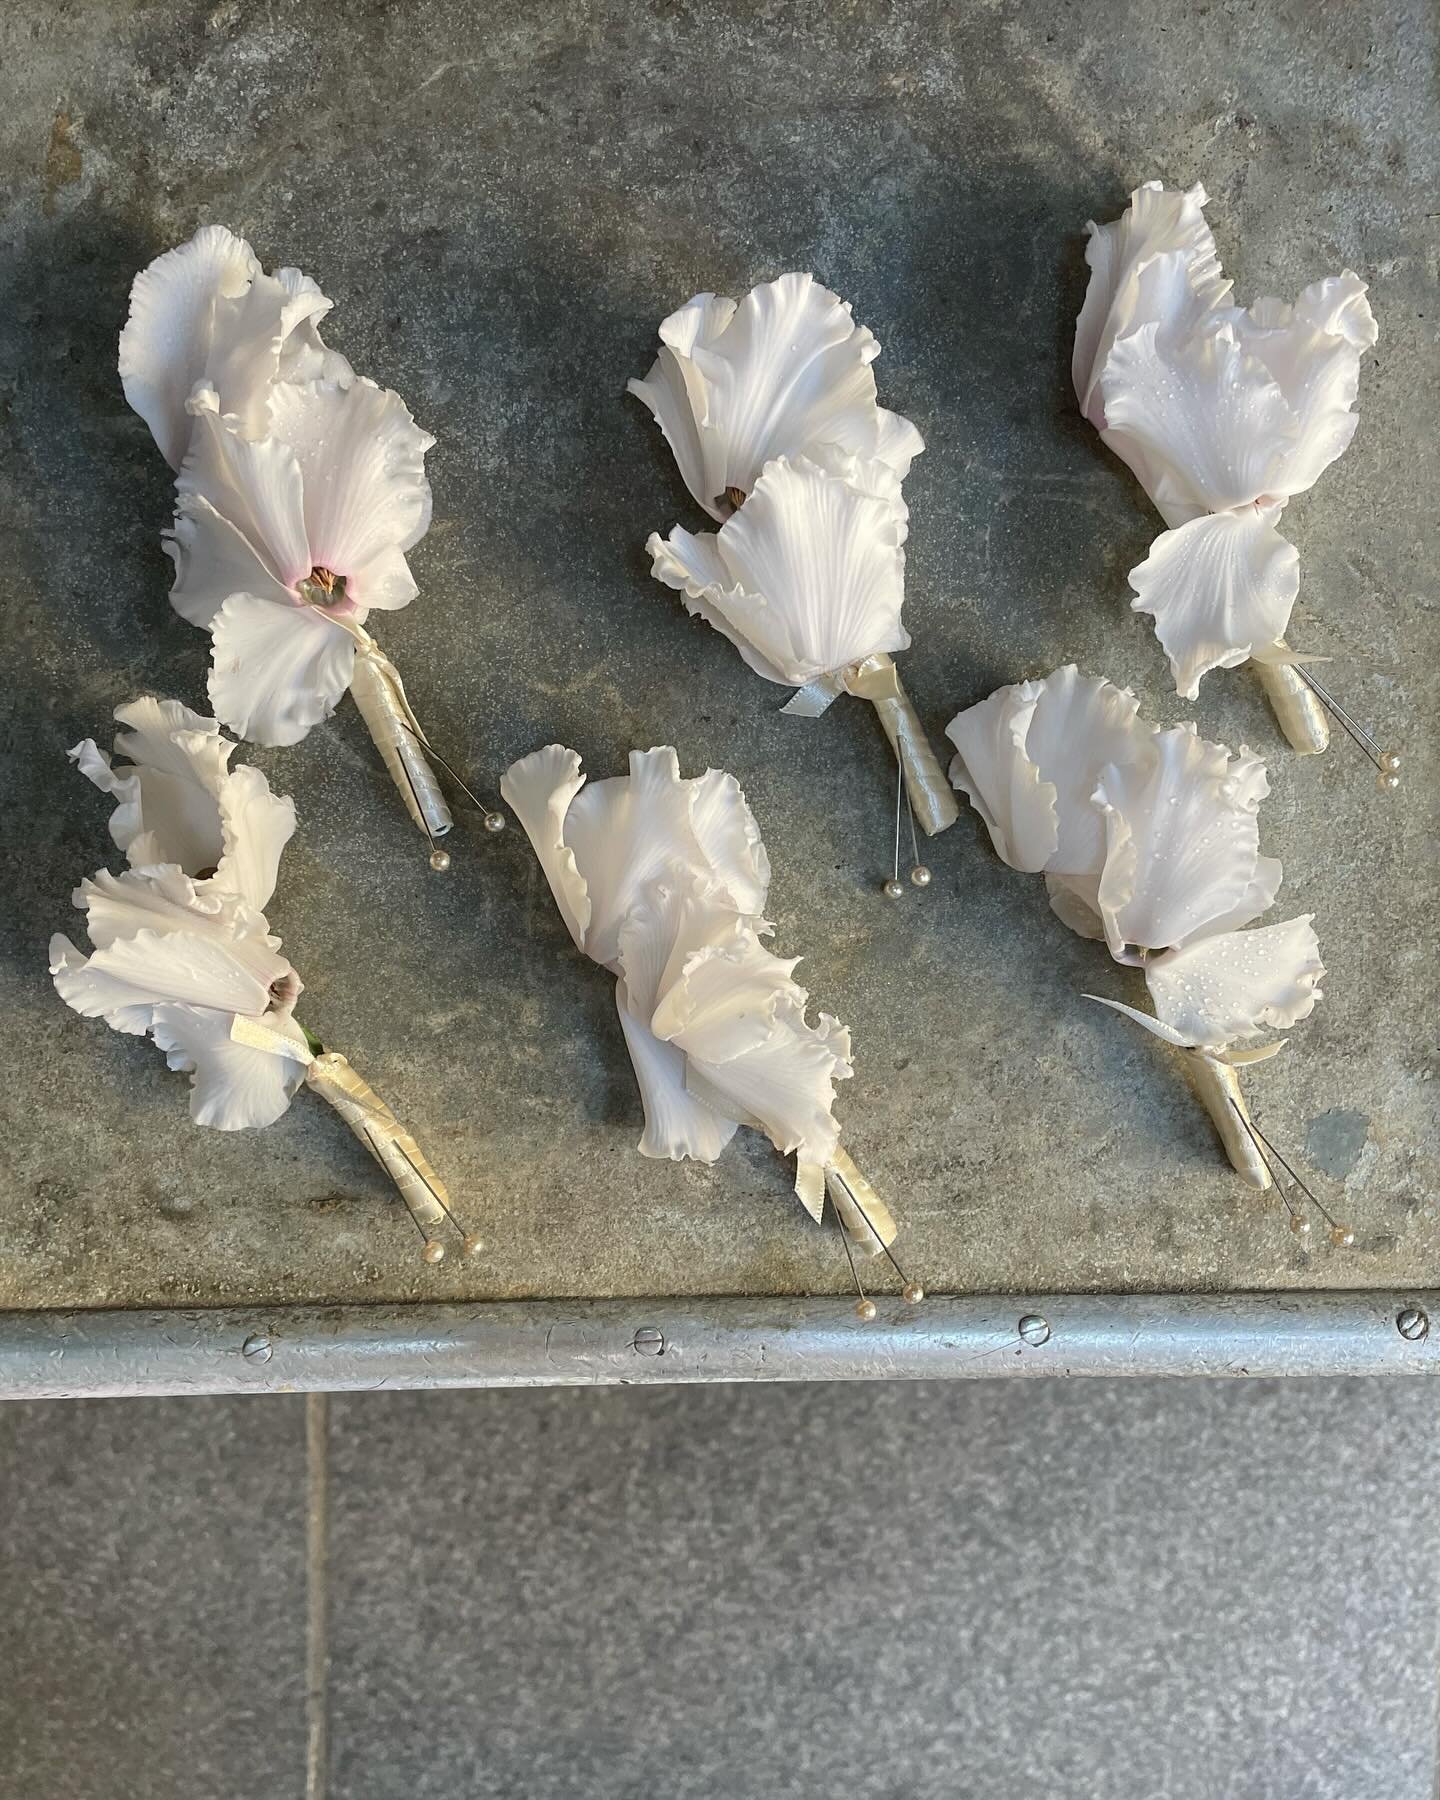 Cr&egrave;me de la cr&egrave;me cyclamen boutonni&egrave;res 🕊️

Loads of samples were trialed and tested to make sure these little beauties held up the test of time on a long hot summer wedding day! 

Loads of questions about these on stories initi